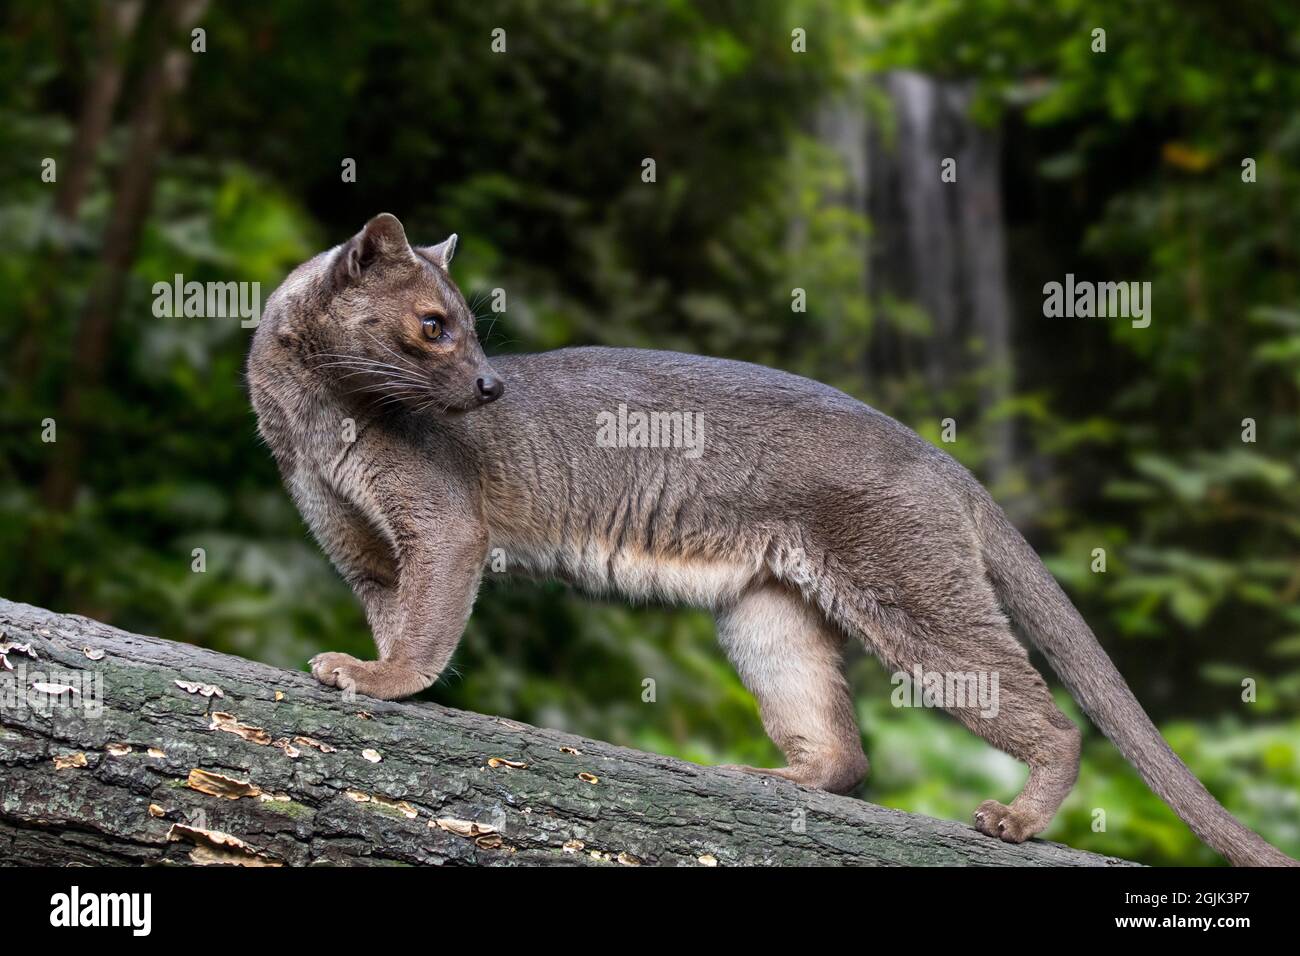 Fossa (Cryptoprocta ferox) hunting in tree in forest, largest Malagasy mammalian carnivore endemic to Madagascar, Africa Stock Photo